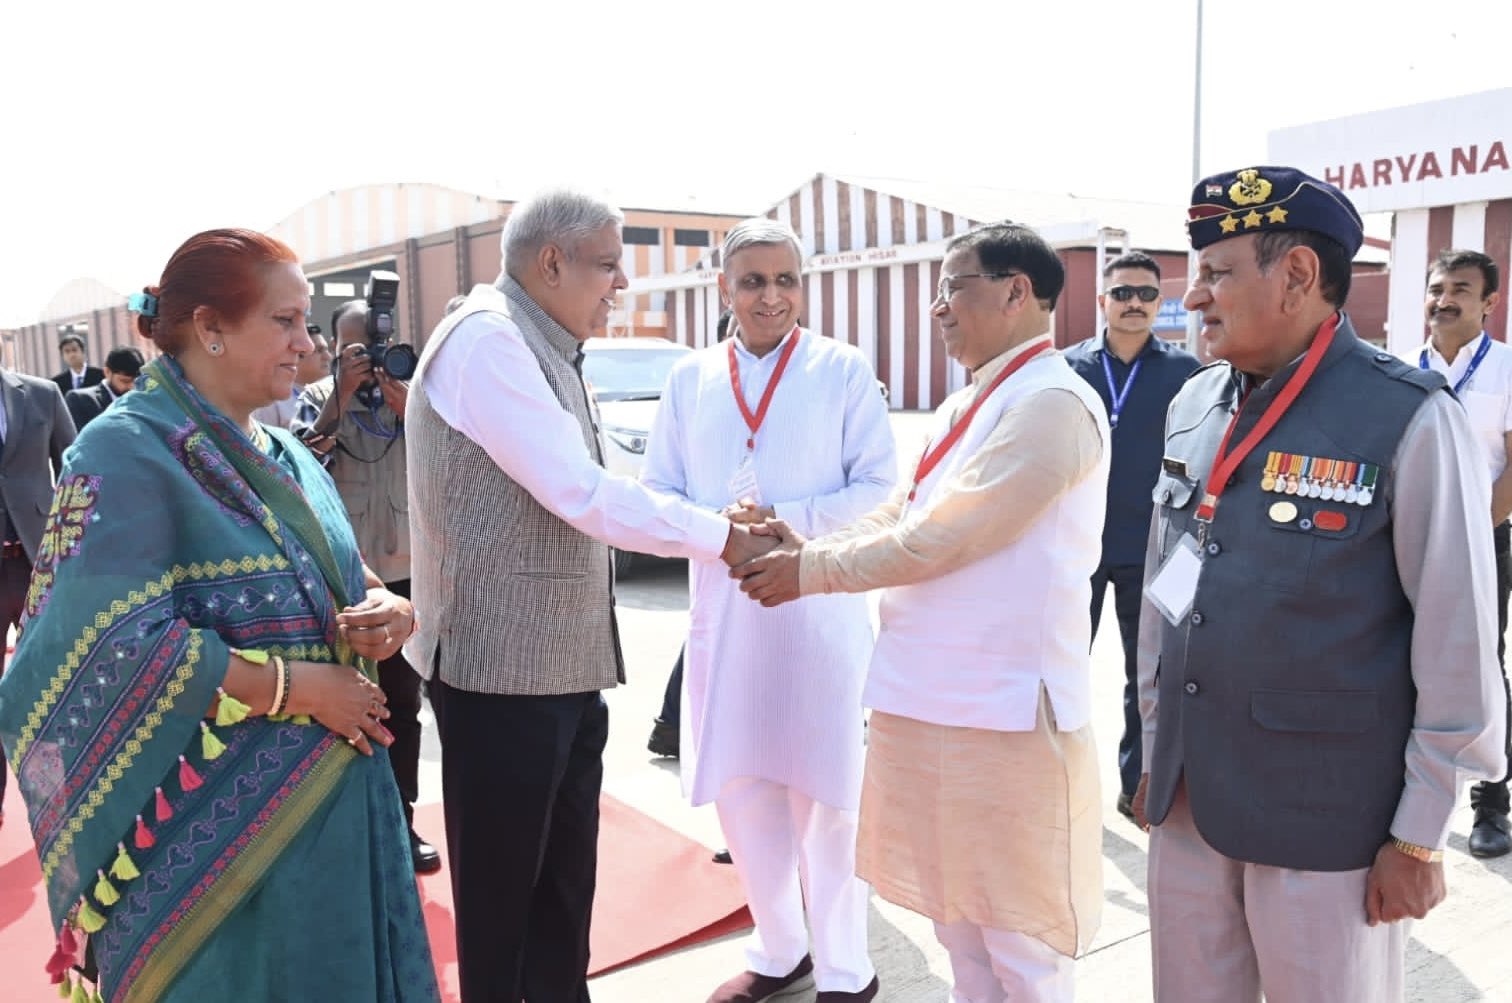 The Vice-President, Shri Jagdeep Dhankhar and Dr Sudesh Dhankhar being welcomed by Shri Jai Parkash Dalal, Agriculture Minister, Government of Haryana, Dr. Kamal Gupta, Minister Urban Local Bodies, Government of Haryana, Shri Brijendra Singh, MP Hisar and Lt.Gen. (Dr.) D. P. Vats (Retd.), MP, Rajya Sabha on their arrival in Hisar, Haryana on October 8, 2023.